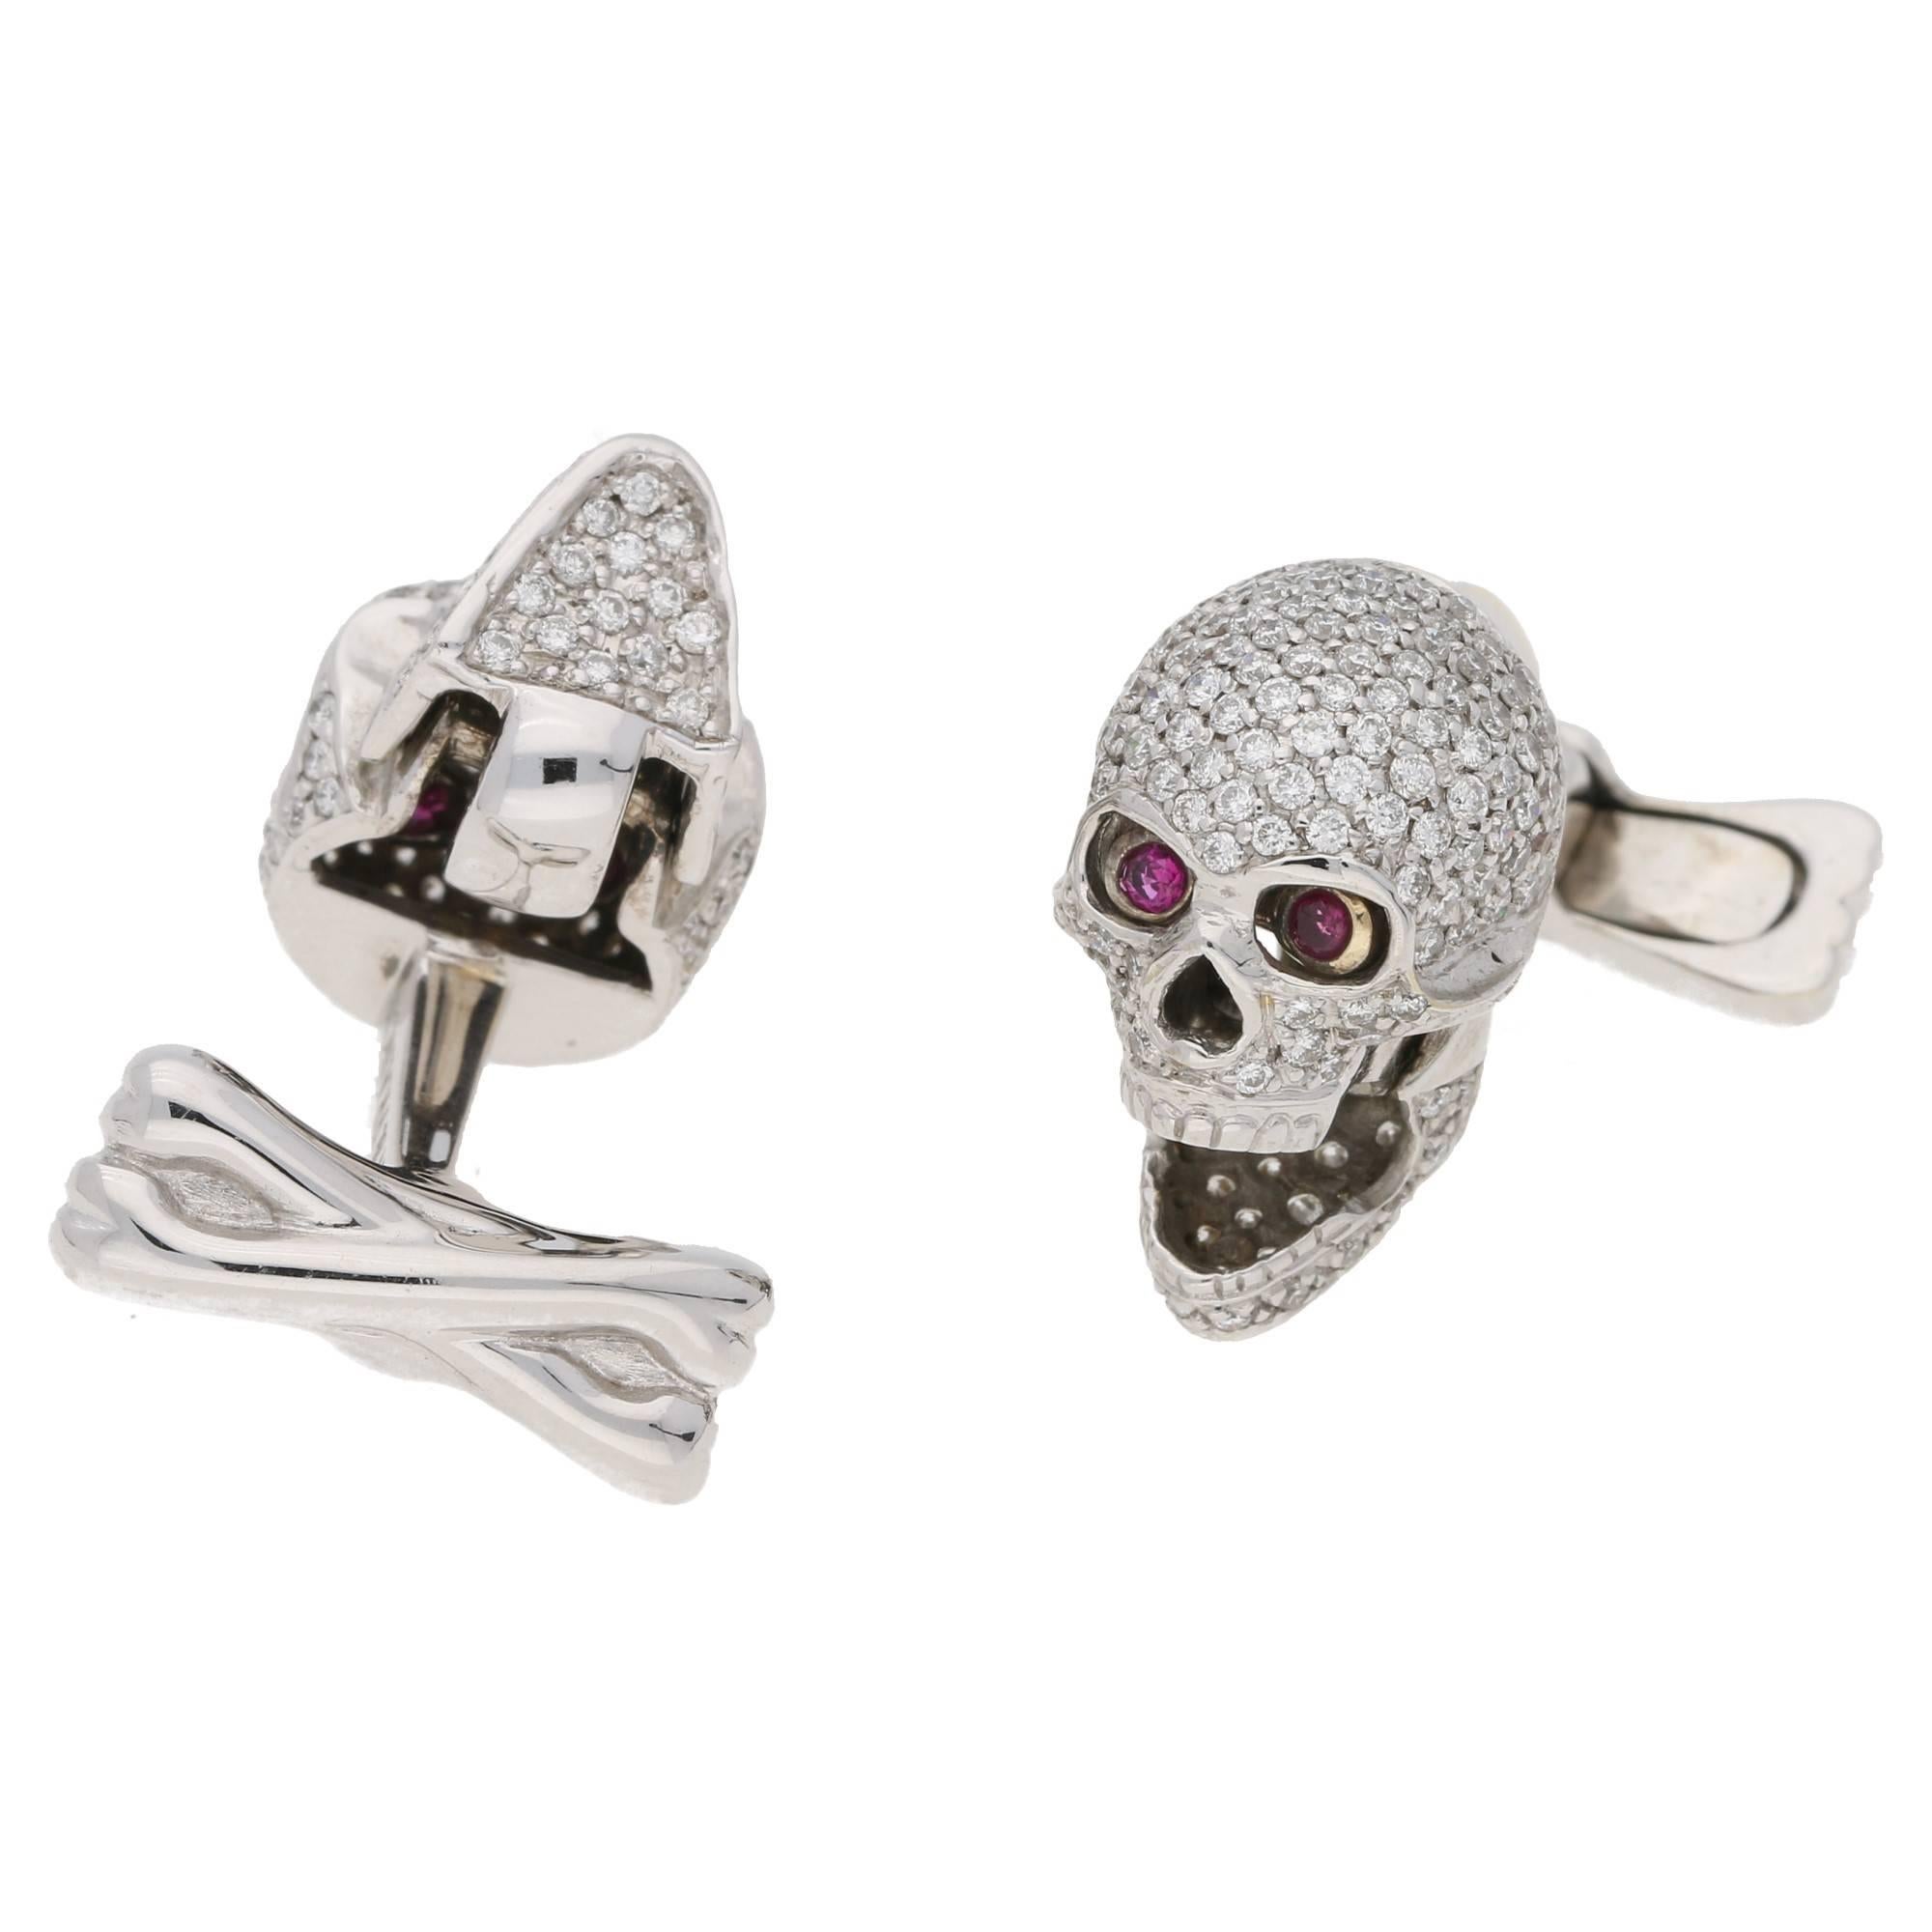 An outrageous pair of 18ct white gold skull and crossbones cufflinks. Each skull is fully pave set in round brilliant cut diamonds and has a hinged jaw that opens the mouth and reveals a hidden set of round faceted ruby eyes. On post and swivel